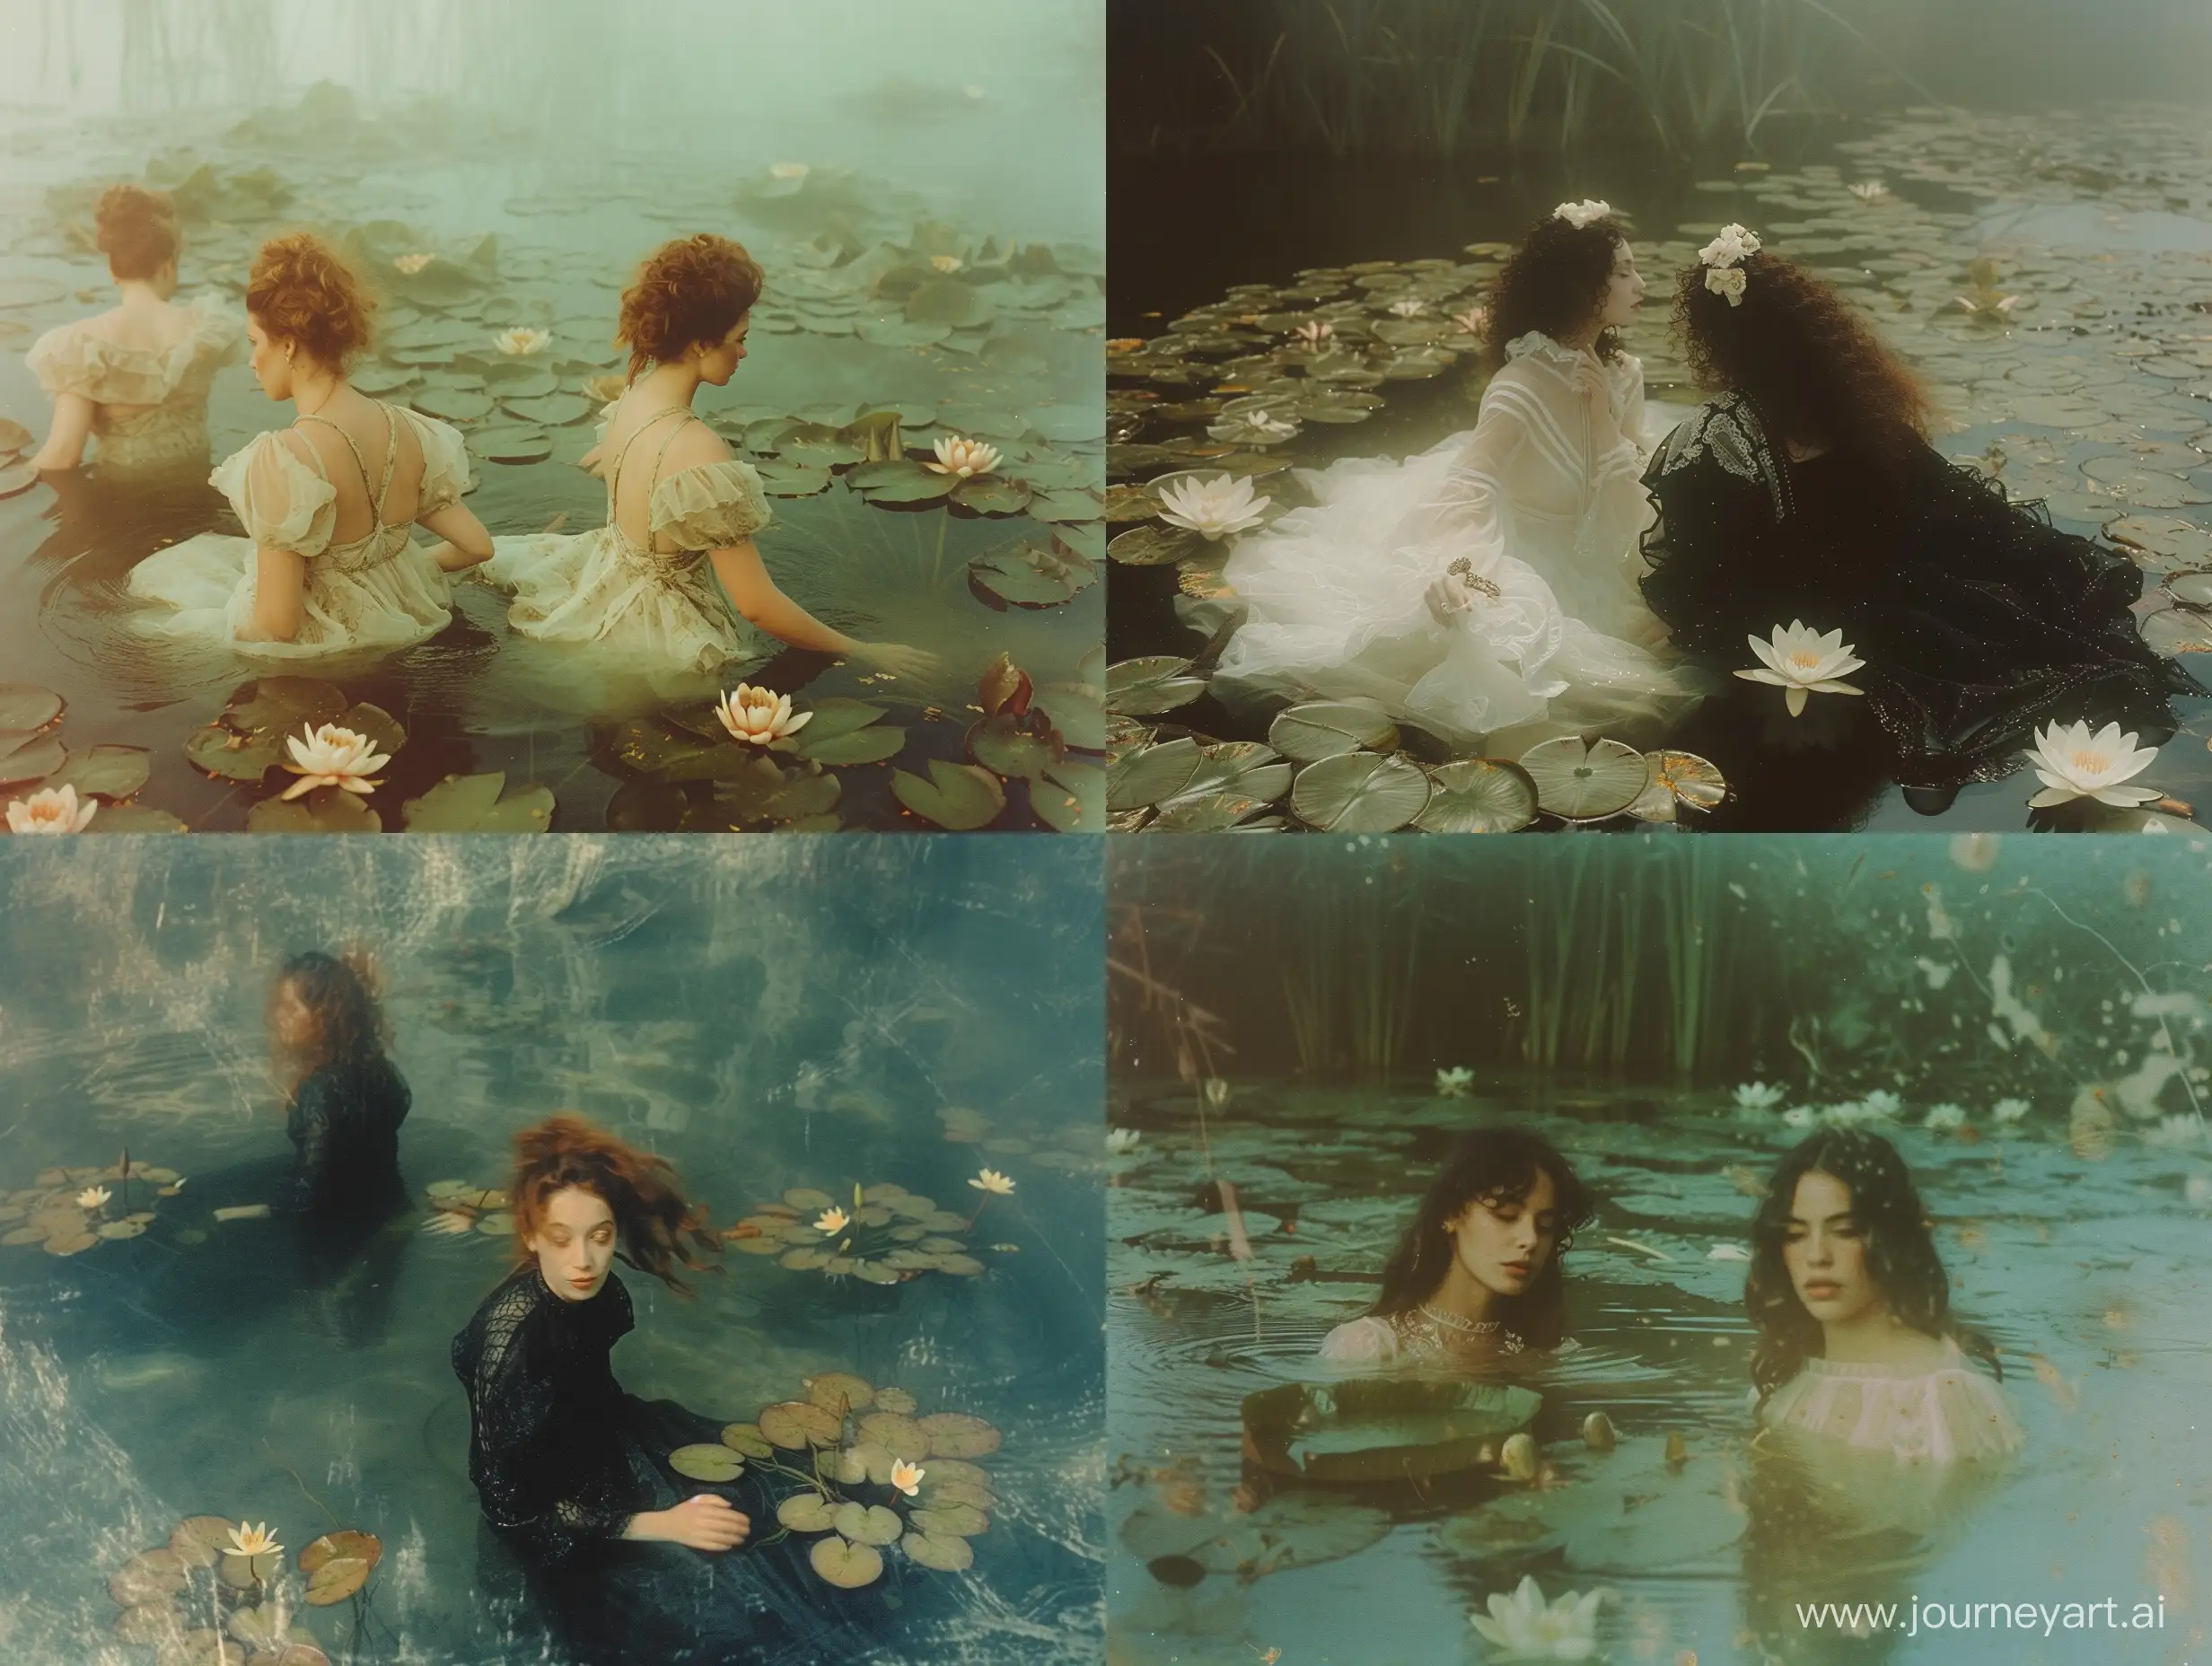 Ethereal-1990s-Women-in-Experimental-Lake-Photography-with-Water-Lilies